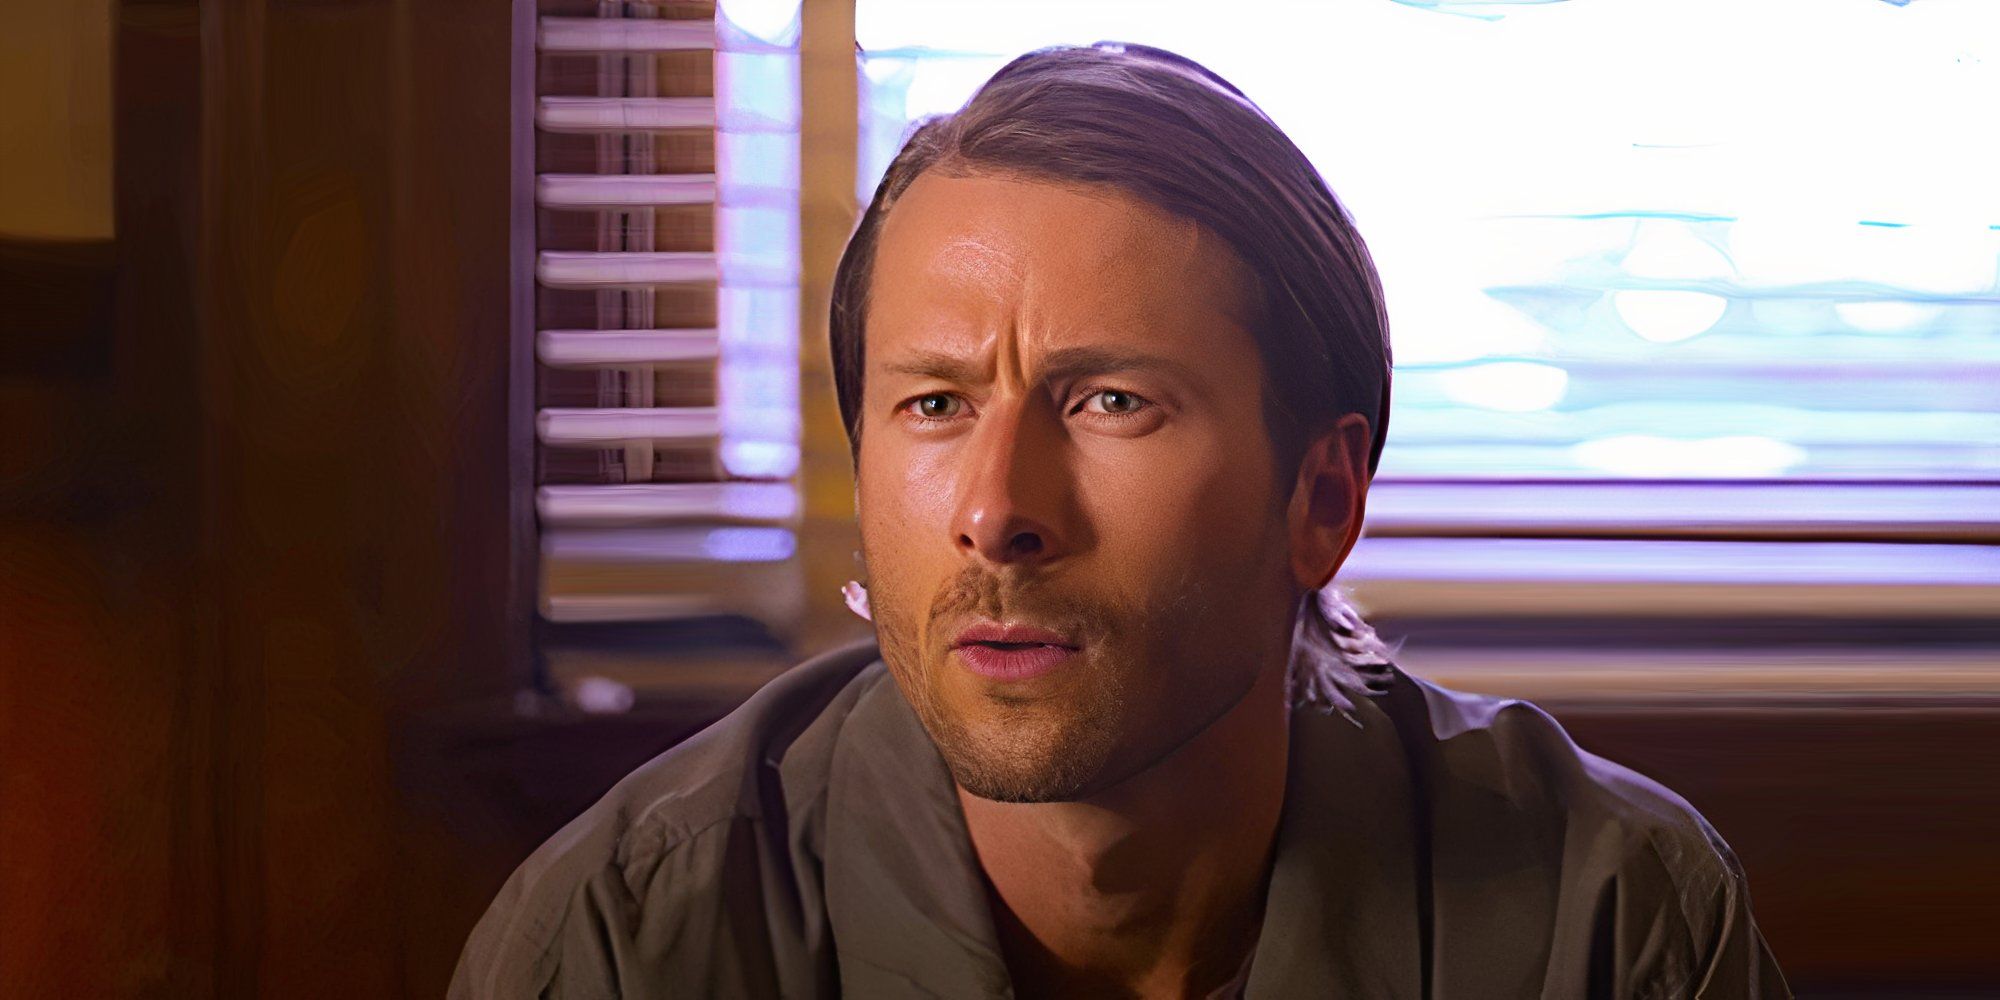 Glen Powell wears a puzzled expression while conversing in a scene from Hit Man